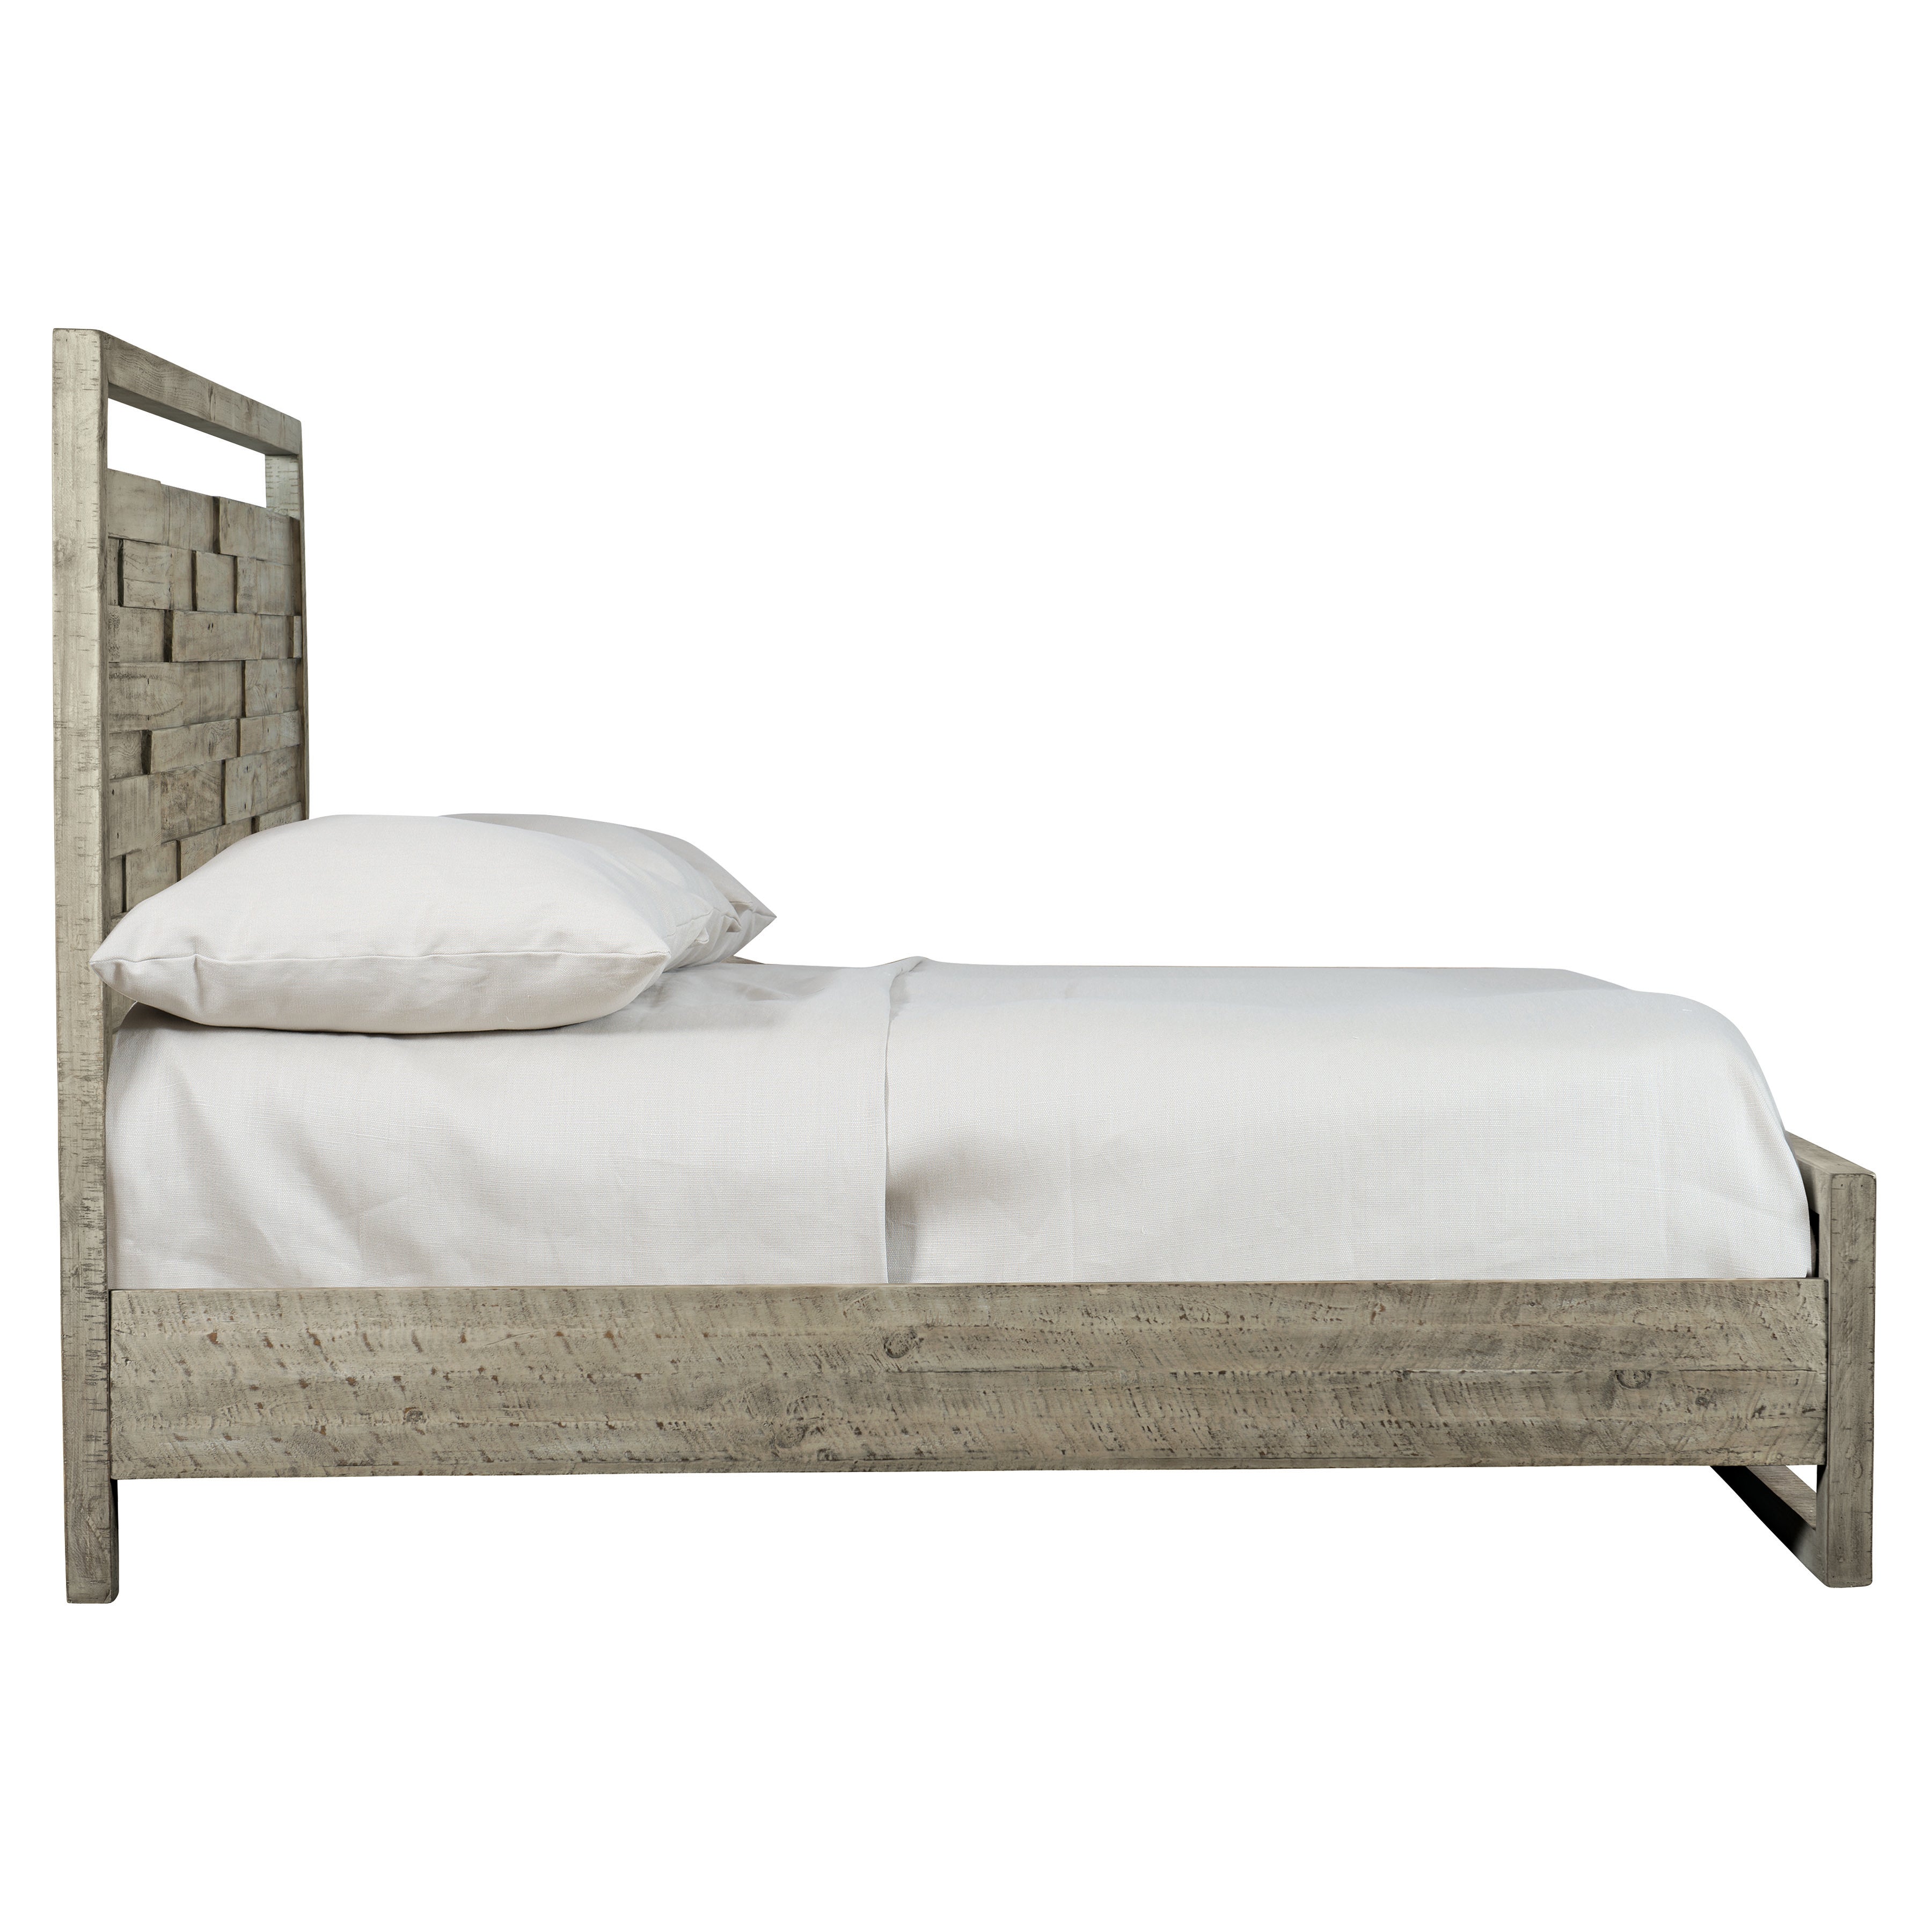 Shaw Wooden King Panel Bed